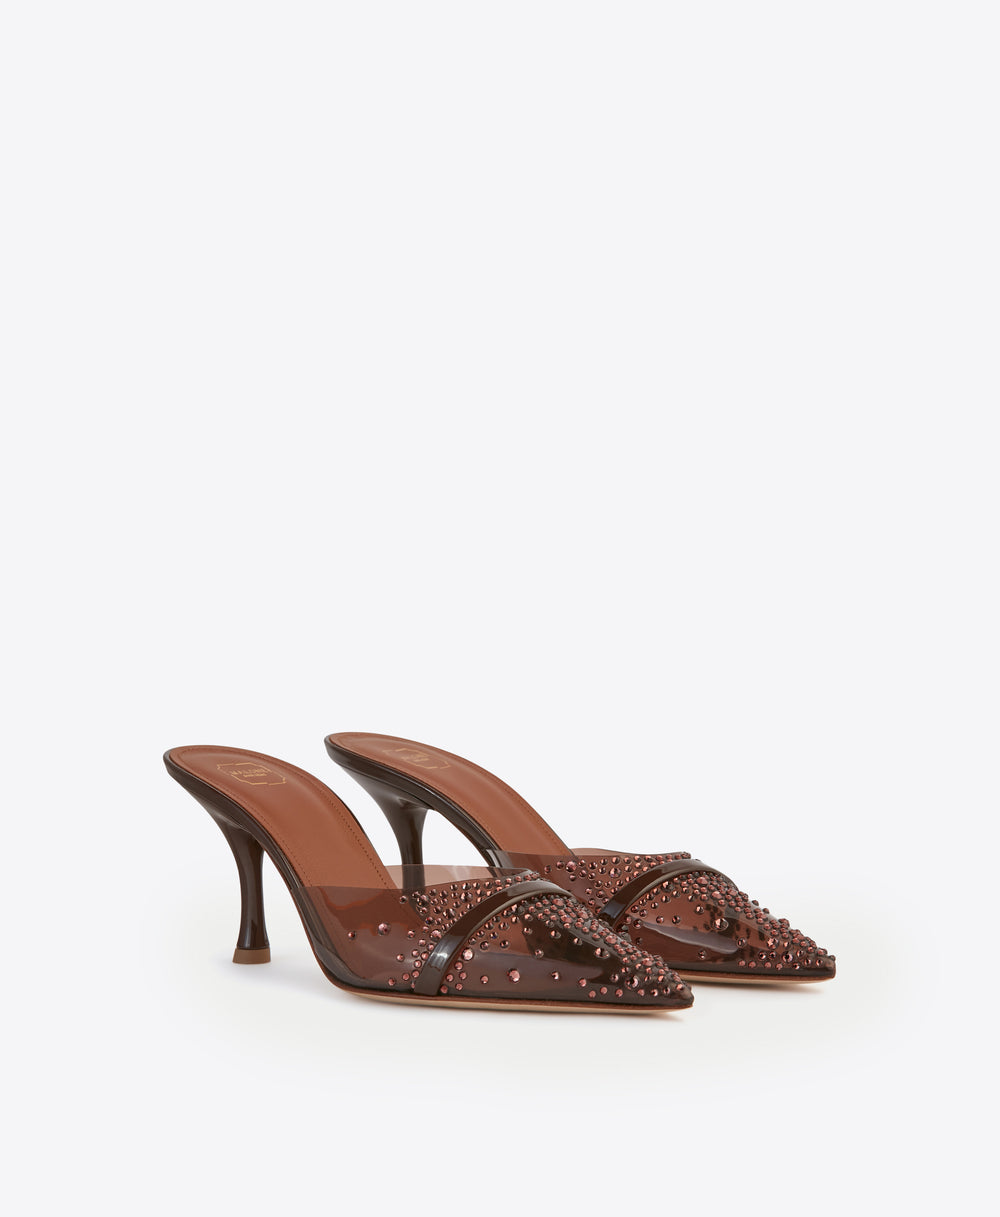 Women's Brown PVC with Crystals Heeled Mules Malone Souliers